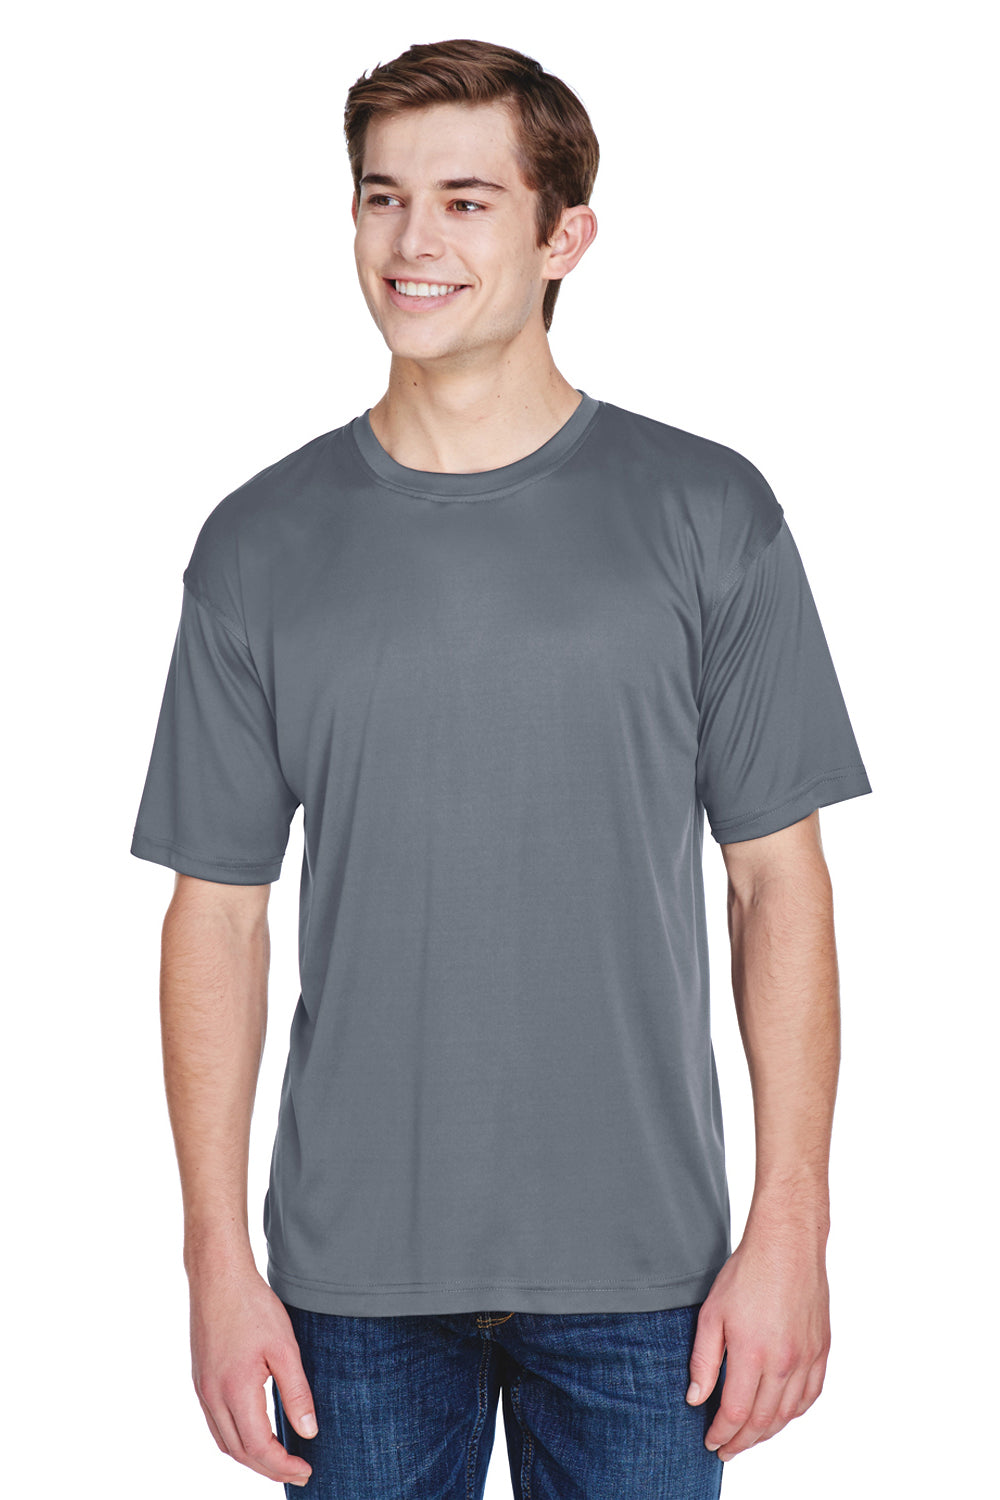 UltraClub 8620 Mens Cool & Dry Performance Moisture Wicking Short Sleeve Crewneck T-Shirt Charcoal Grey Front